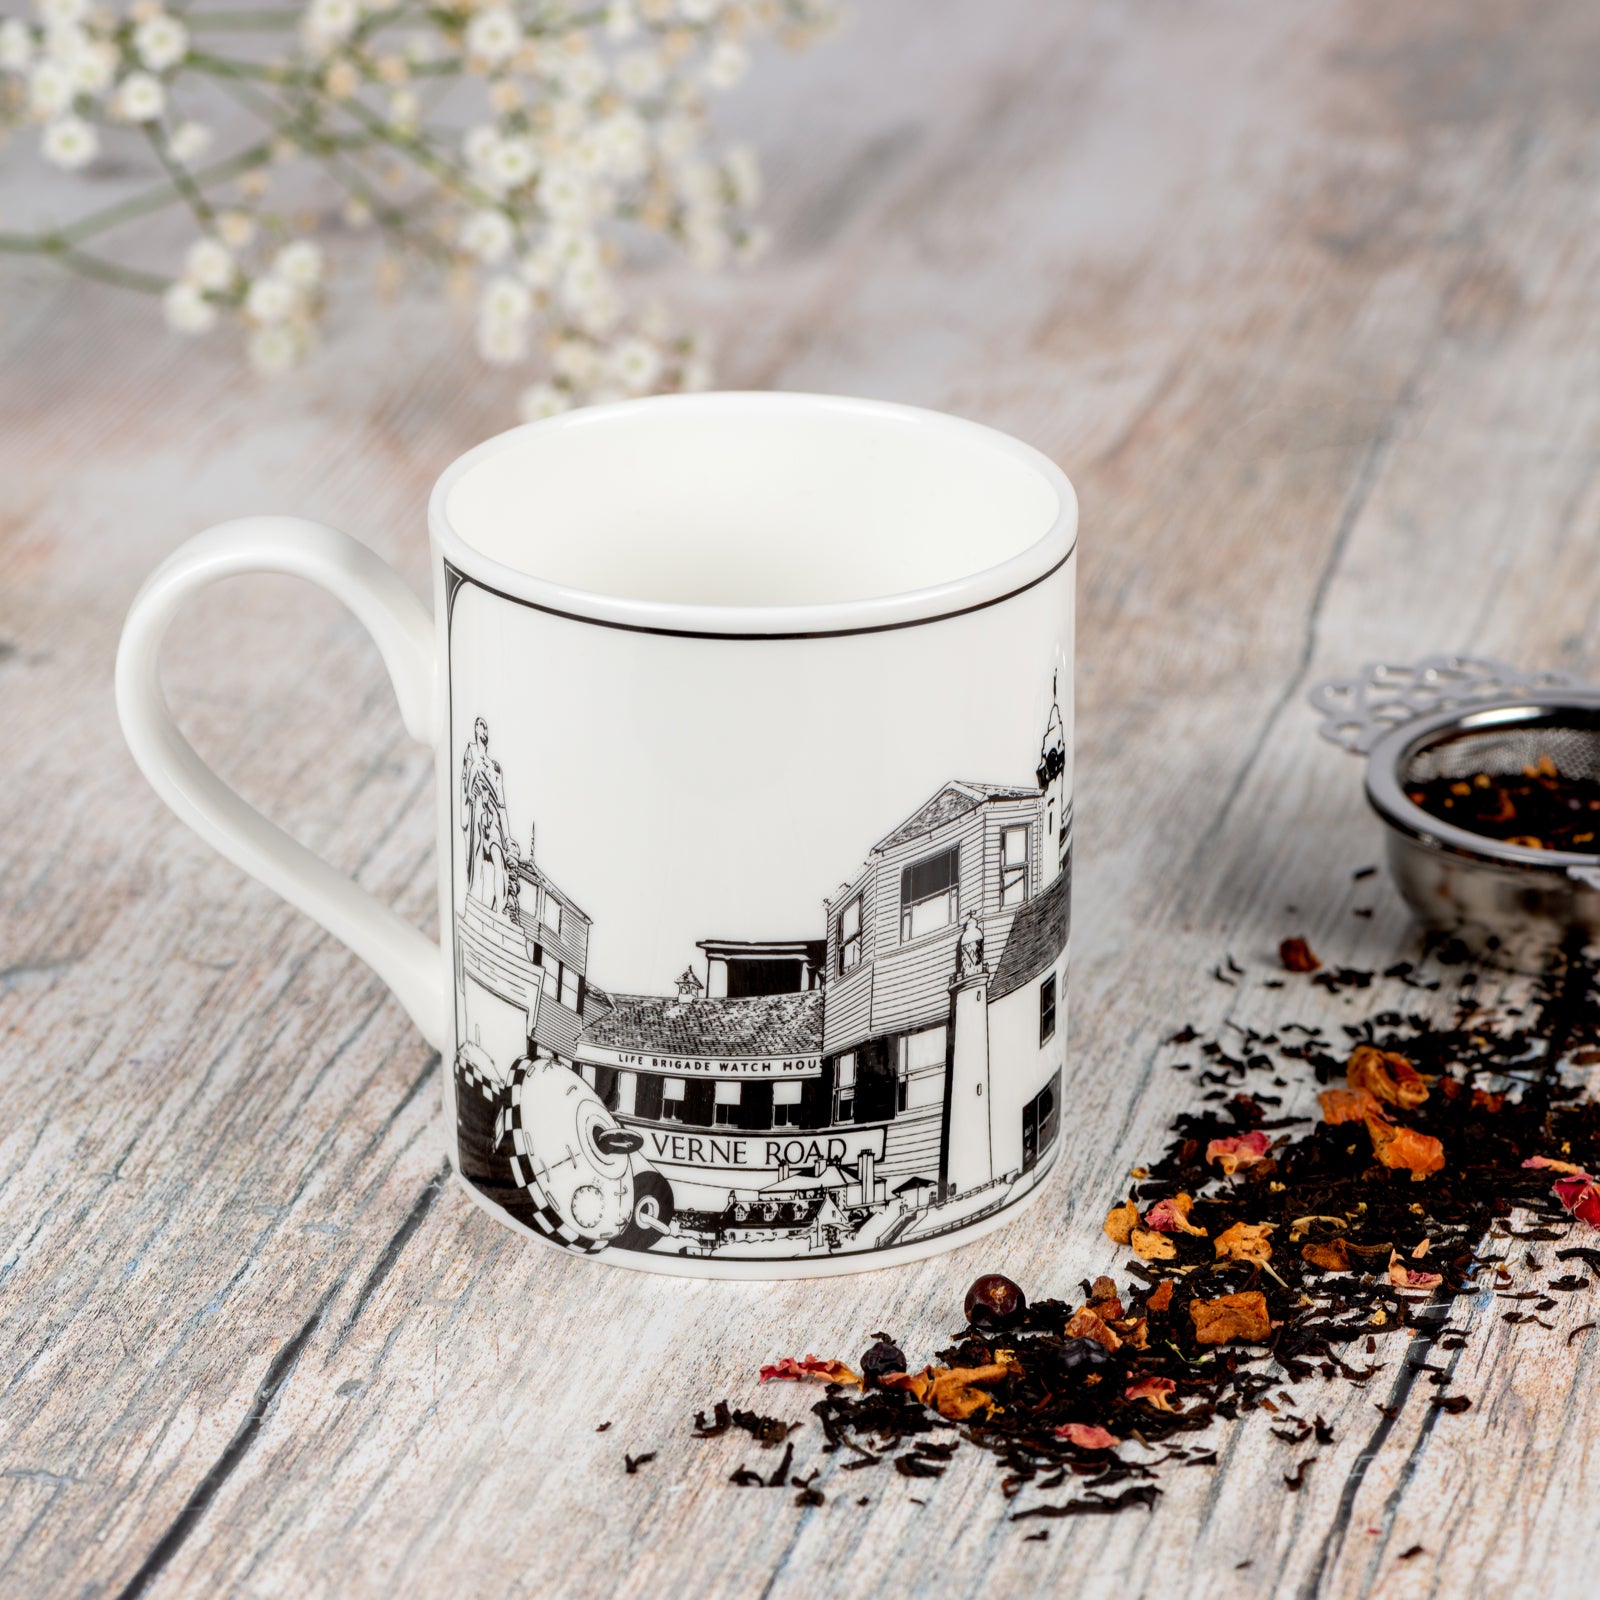 Fine china mug featuring landmarks from Tynemouth, Cullercoats, Whitley Bay and North Shields. With a silver tea strainer and scattered tea leaves.